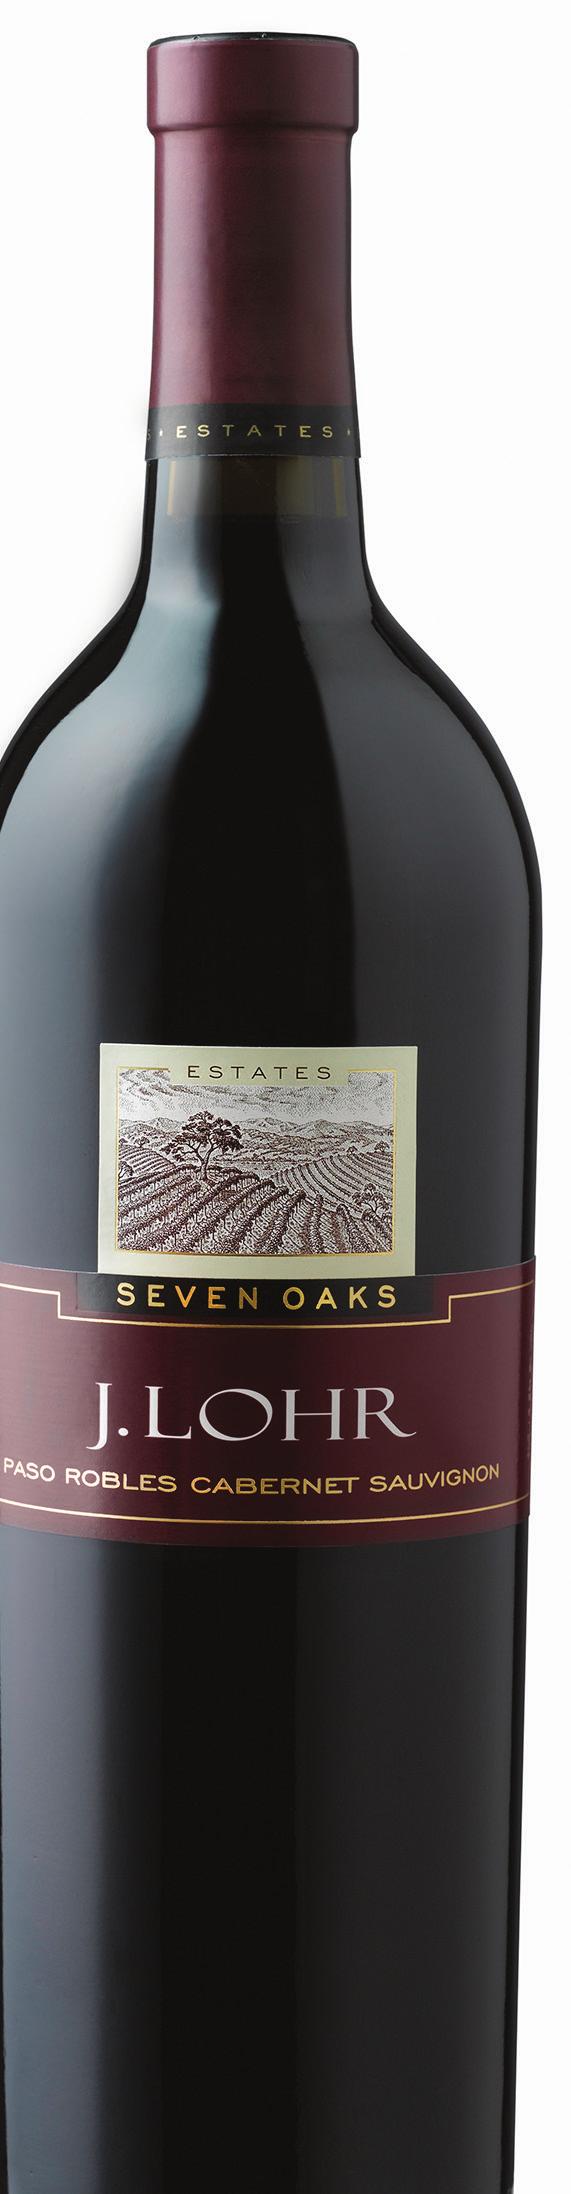 2013 J. LOHR ESTATES SEVEN OAKS CABERNET SAUVIGNON paso robles Ever noticed how good things often come in threes?